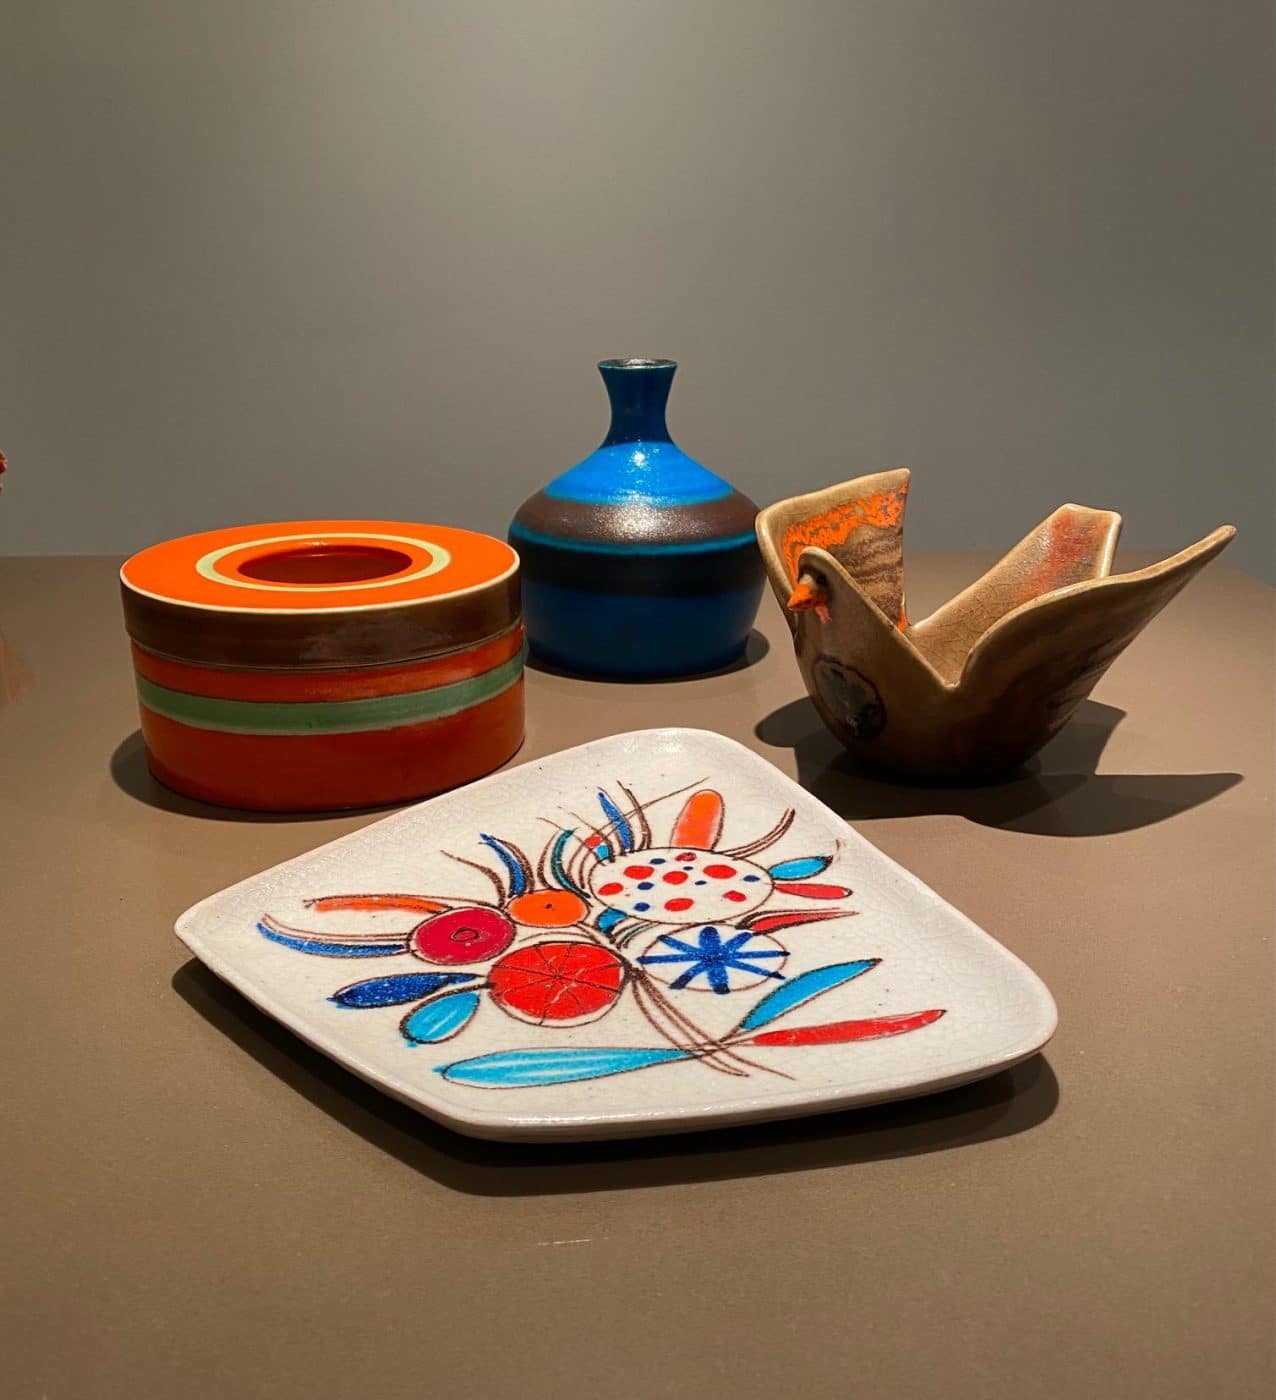 A white plate with abstract red orange and blue flowers by Guido Gambone surrounded by other ceramic vessels